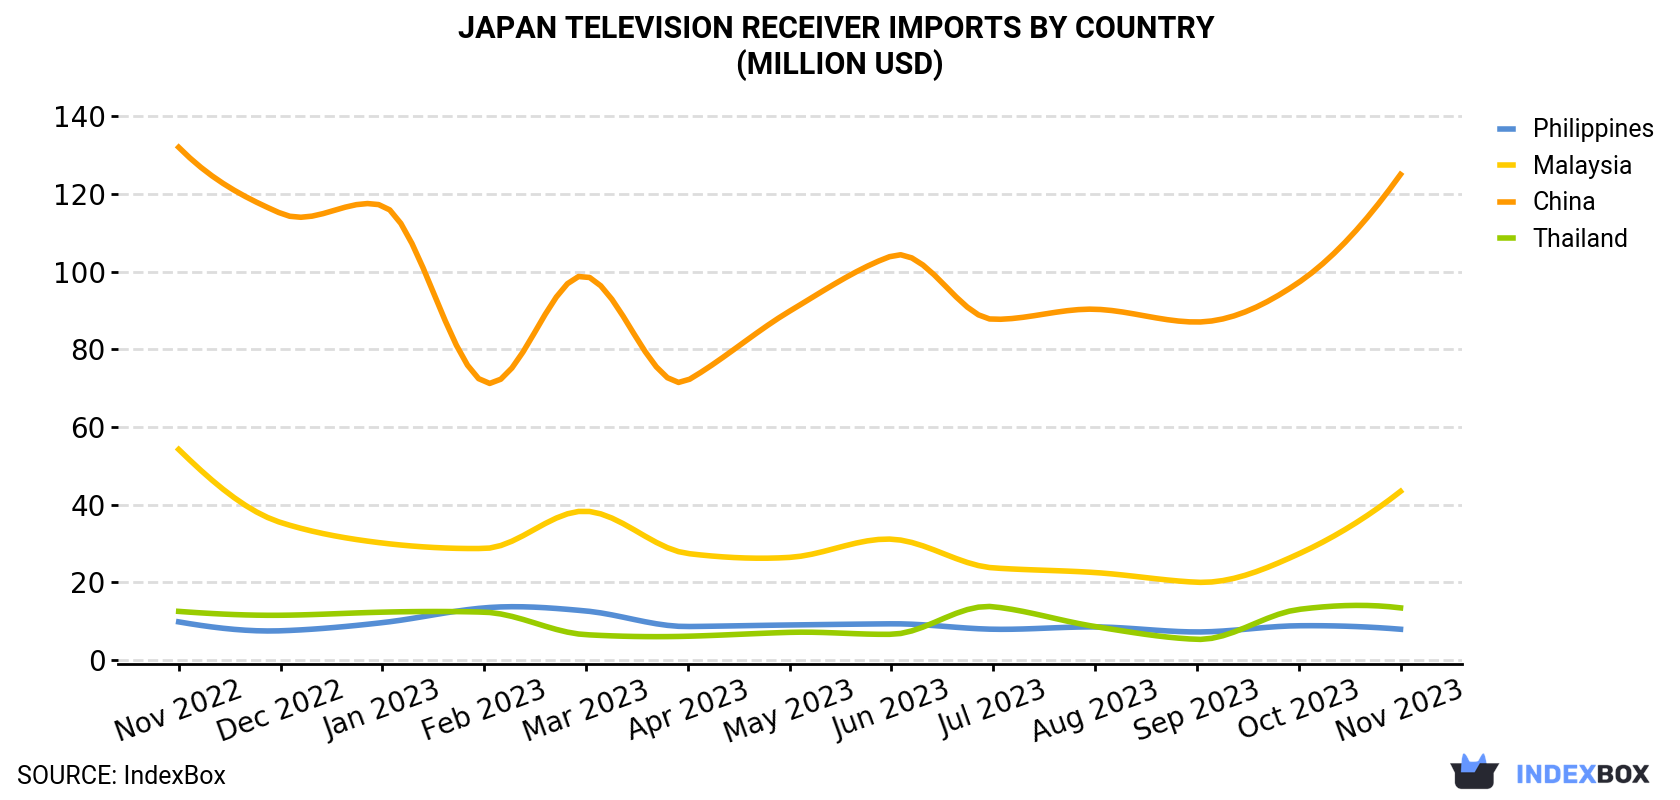 Japan Television Receiver Imports By Country (Million USD)